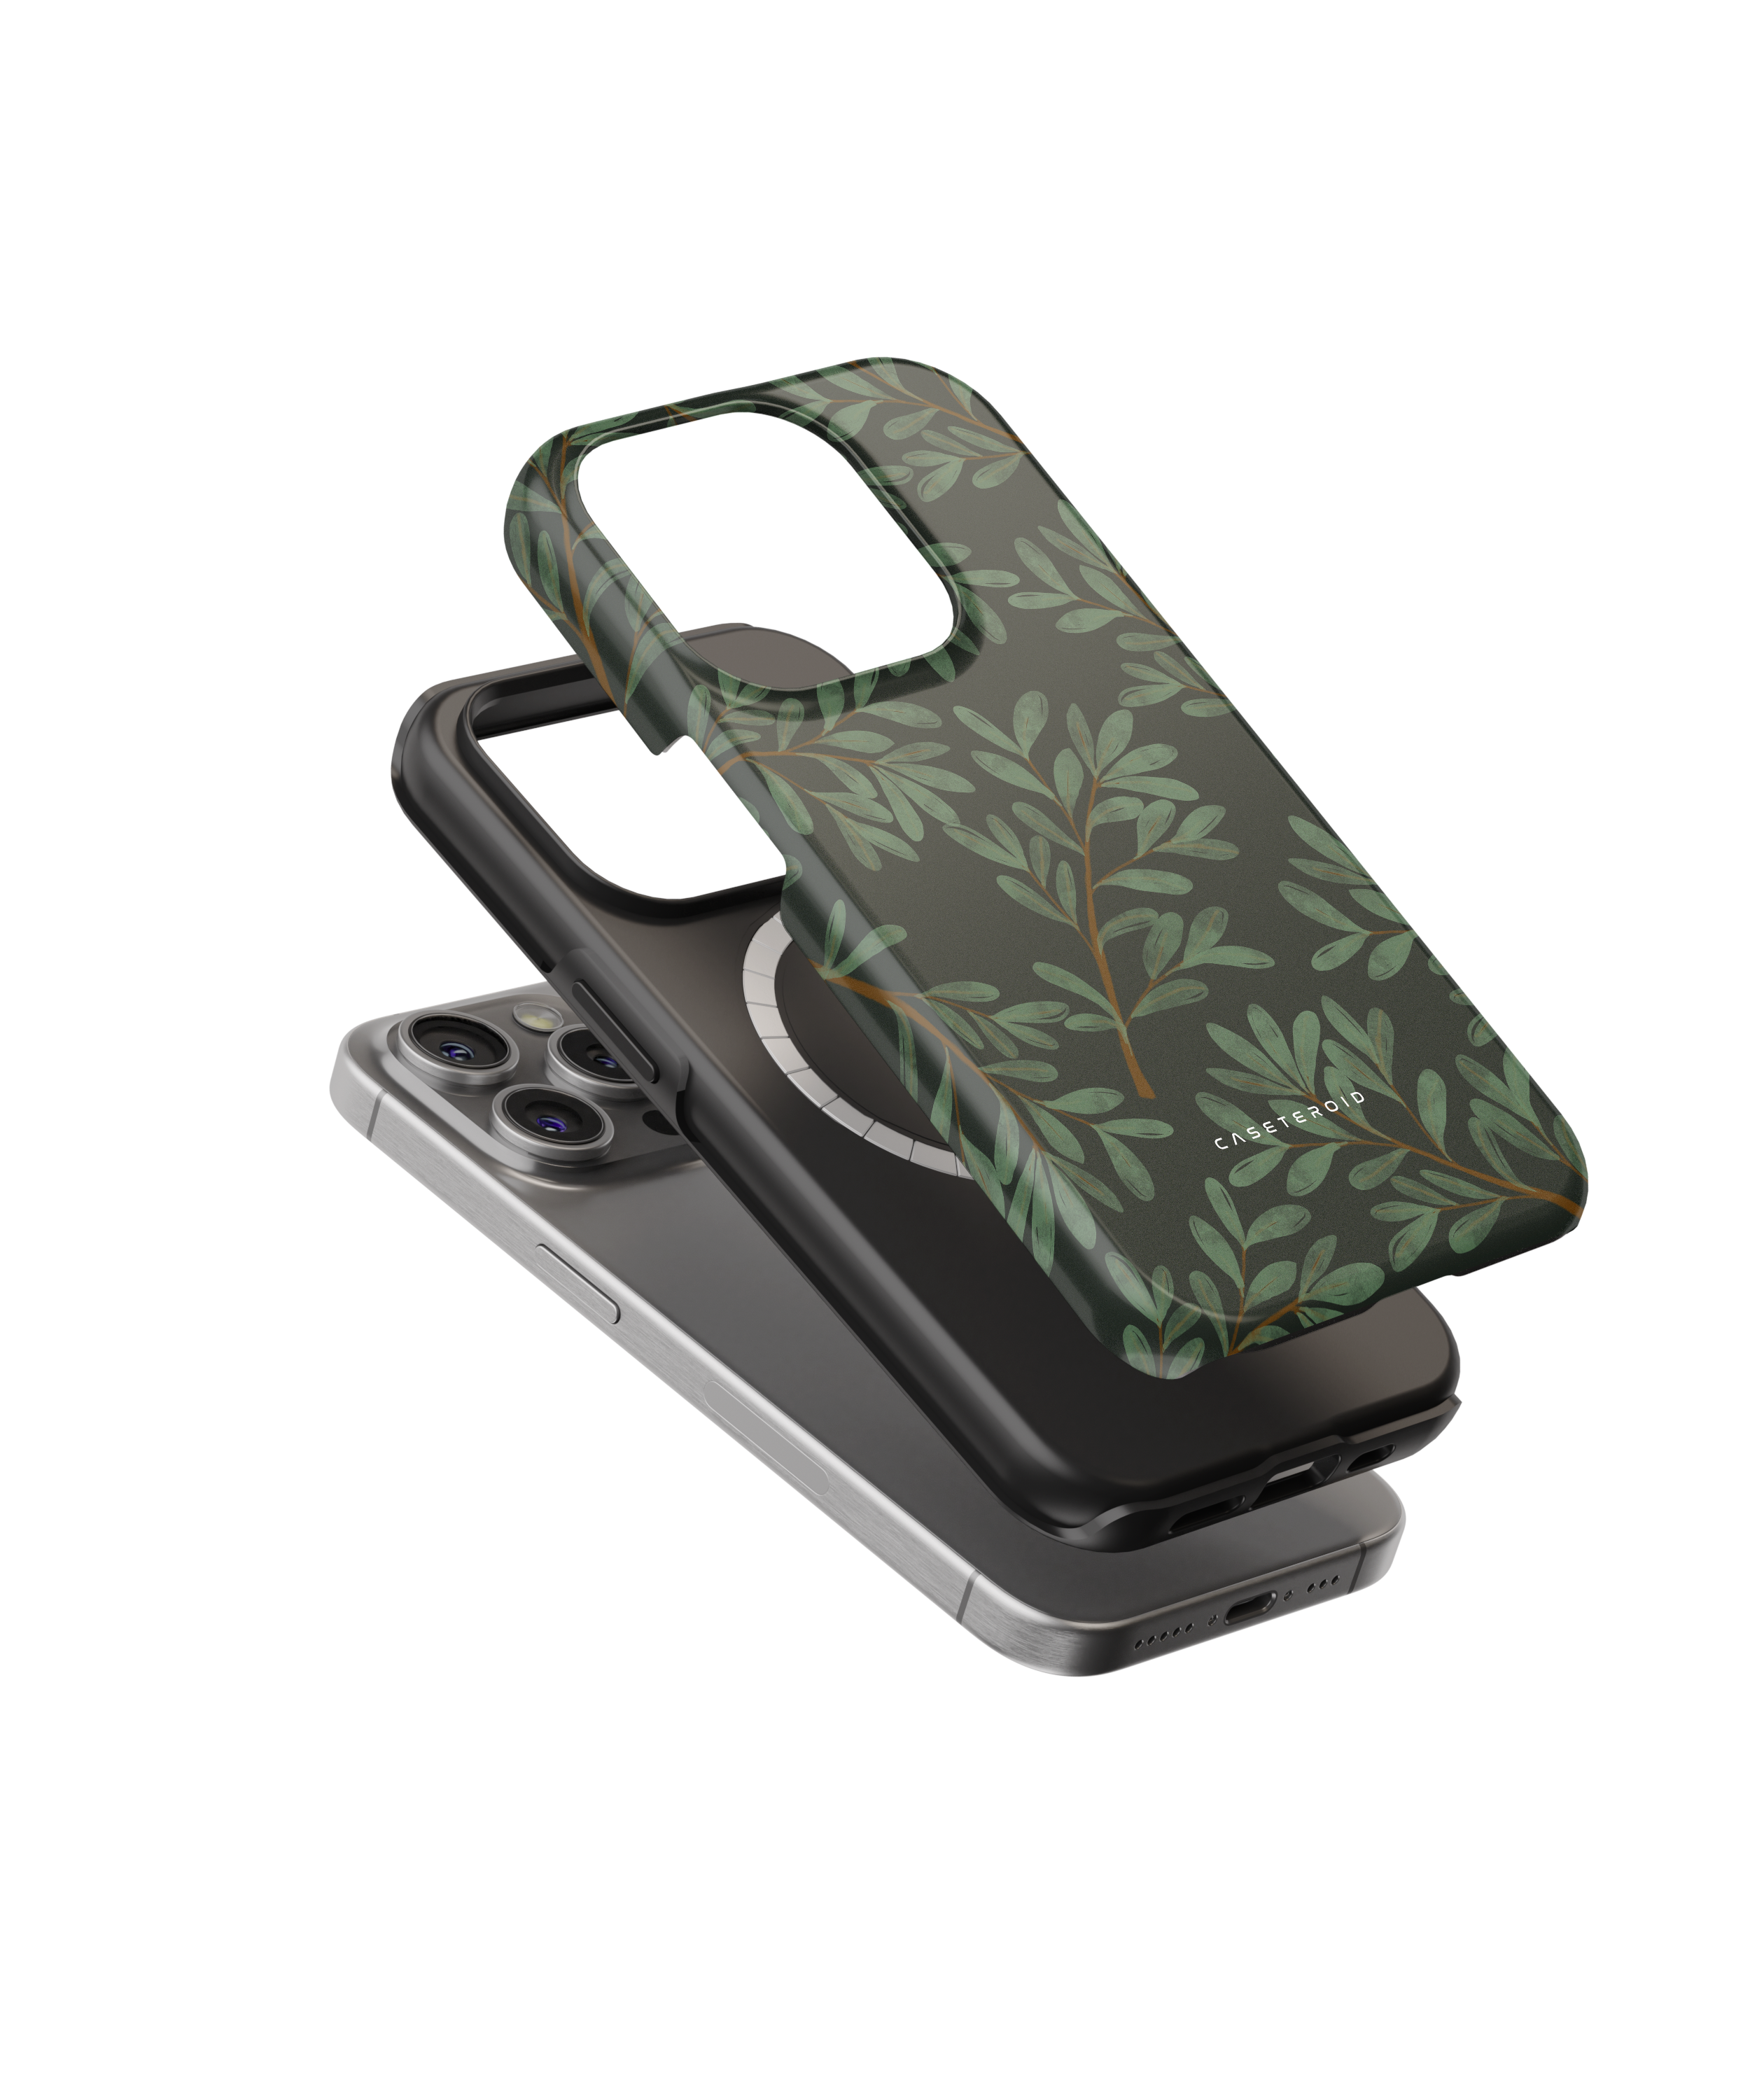 iPhone Tough Case with MagSafe - Leafy Canopy - CASETEROID